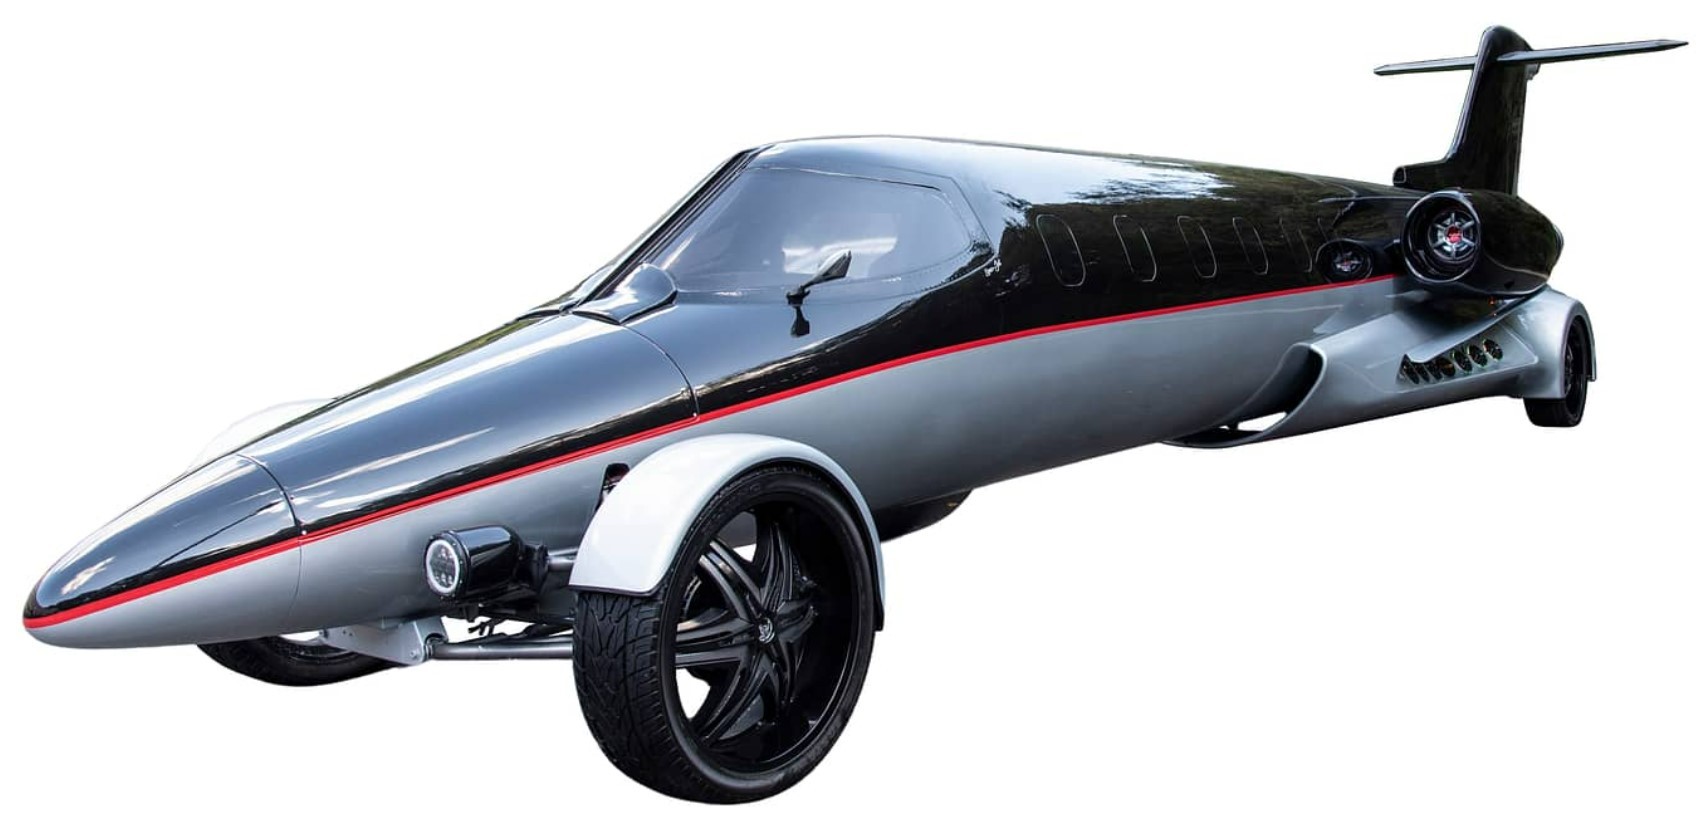 Learmousine: The Only Road-Legal Airplane Limousine Is an Insane Custom  Project - autoevolution